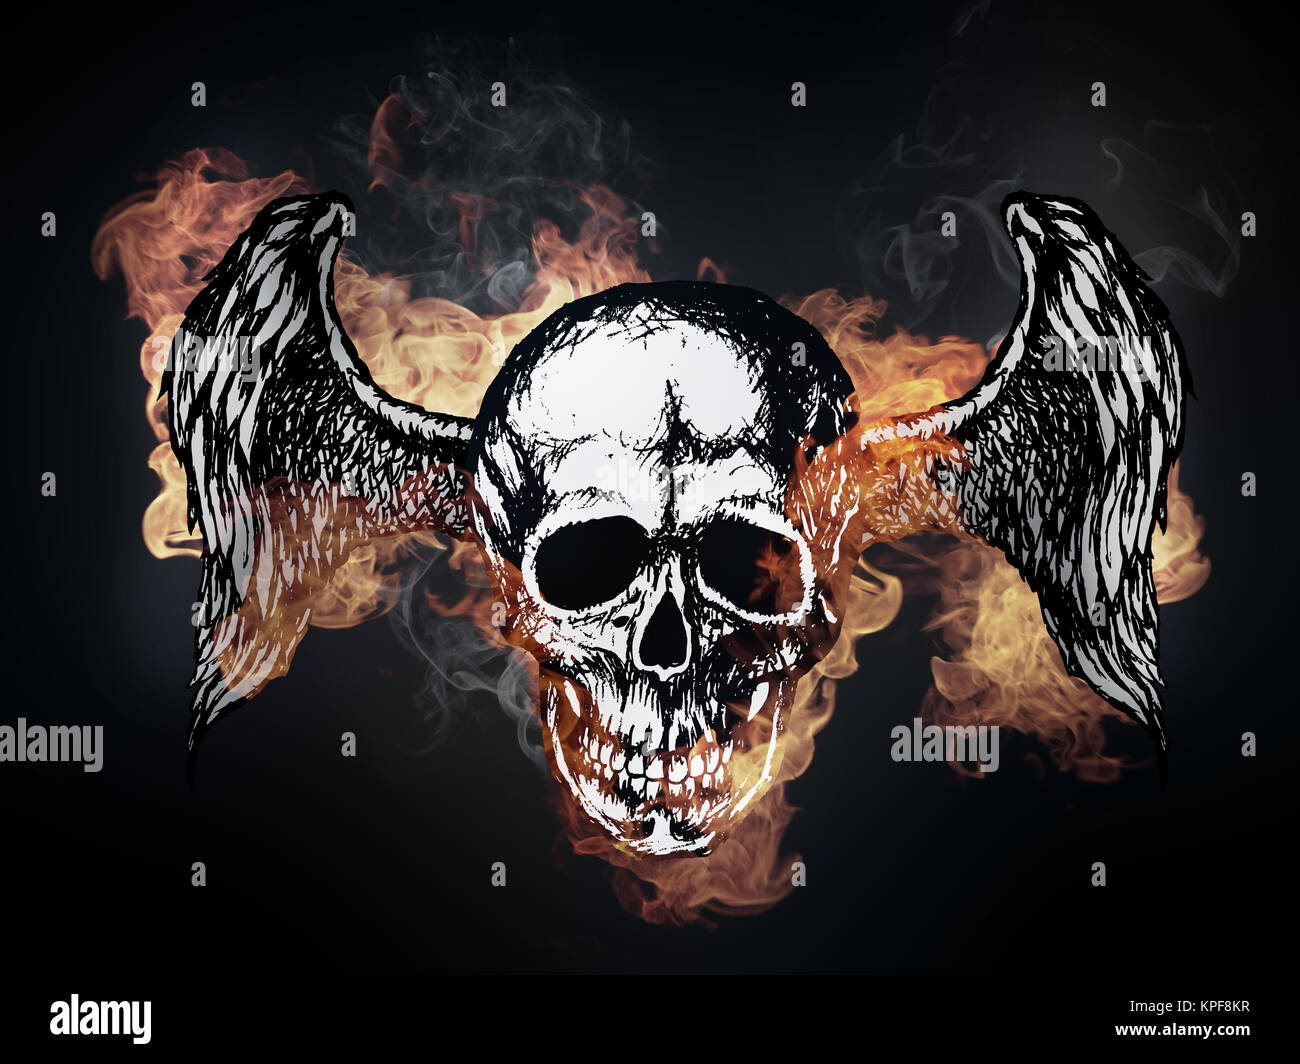 Sketch of Human Skull in Fire Isolated on Black Background Stock Photo